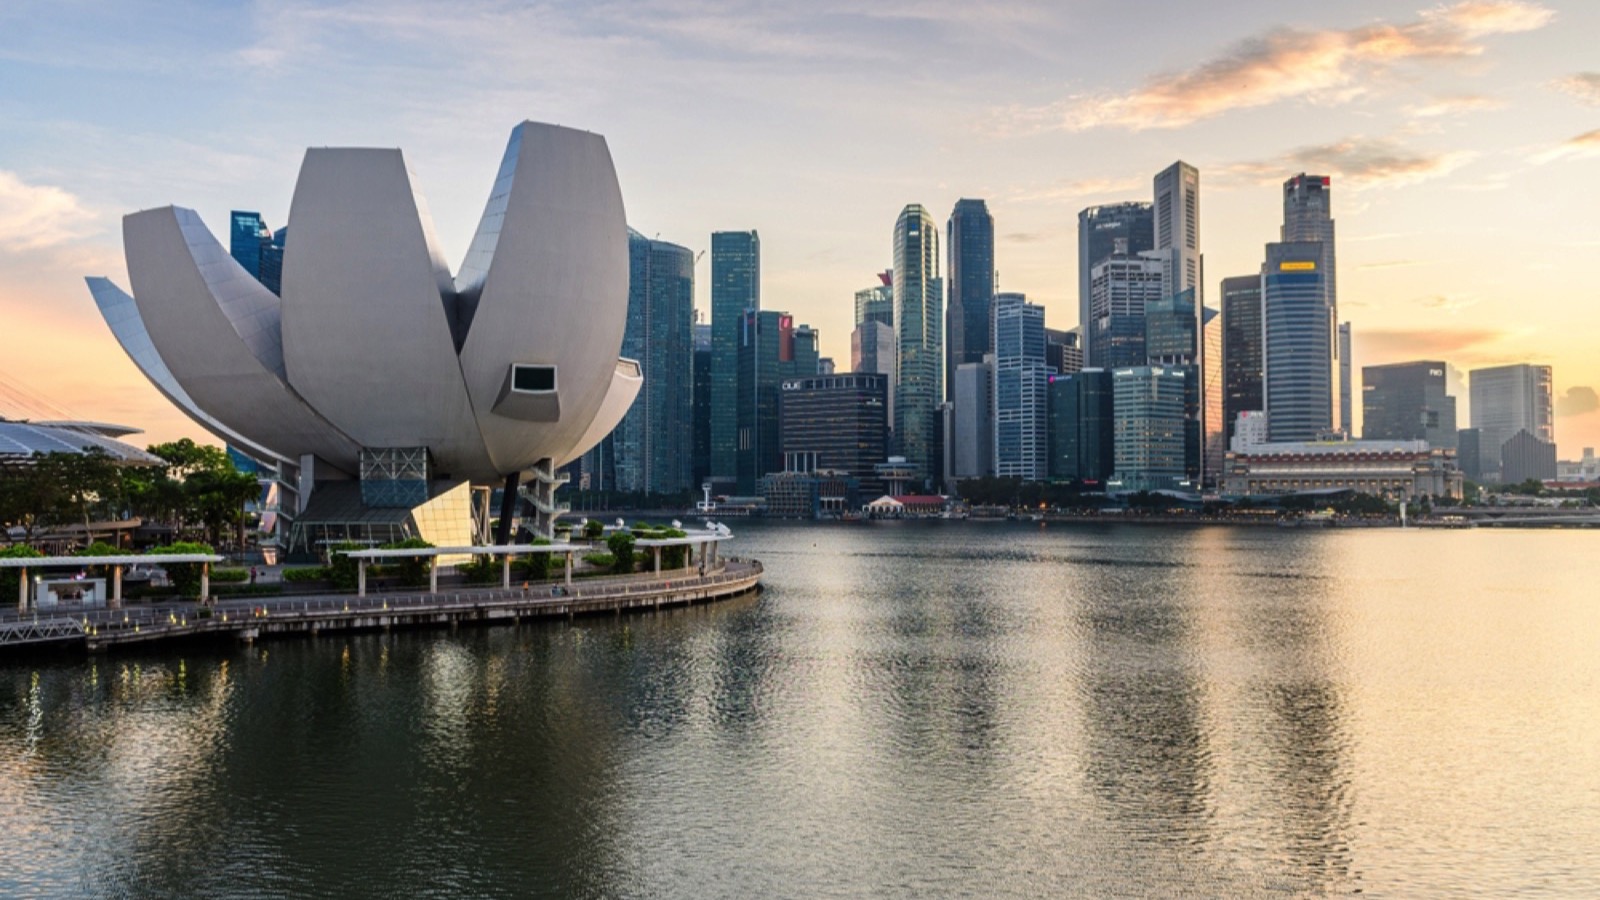 <p>Singapore, for one tourist of the thread, trumps every destination in Southeast Asia. Someone mentions Marine Bay Sand and Garden by the Bay as destinations of architectural wonders hinged on futuristic blueprints.</p>